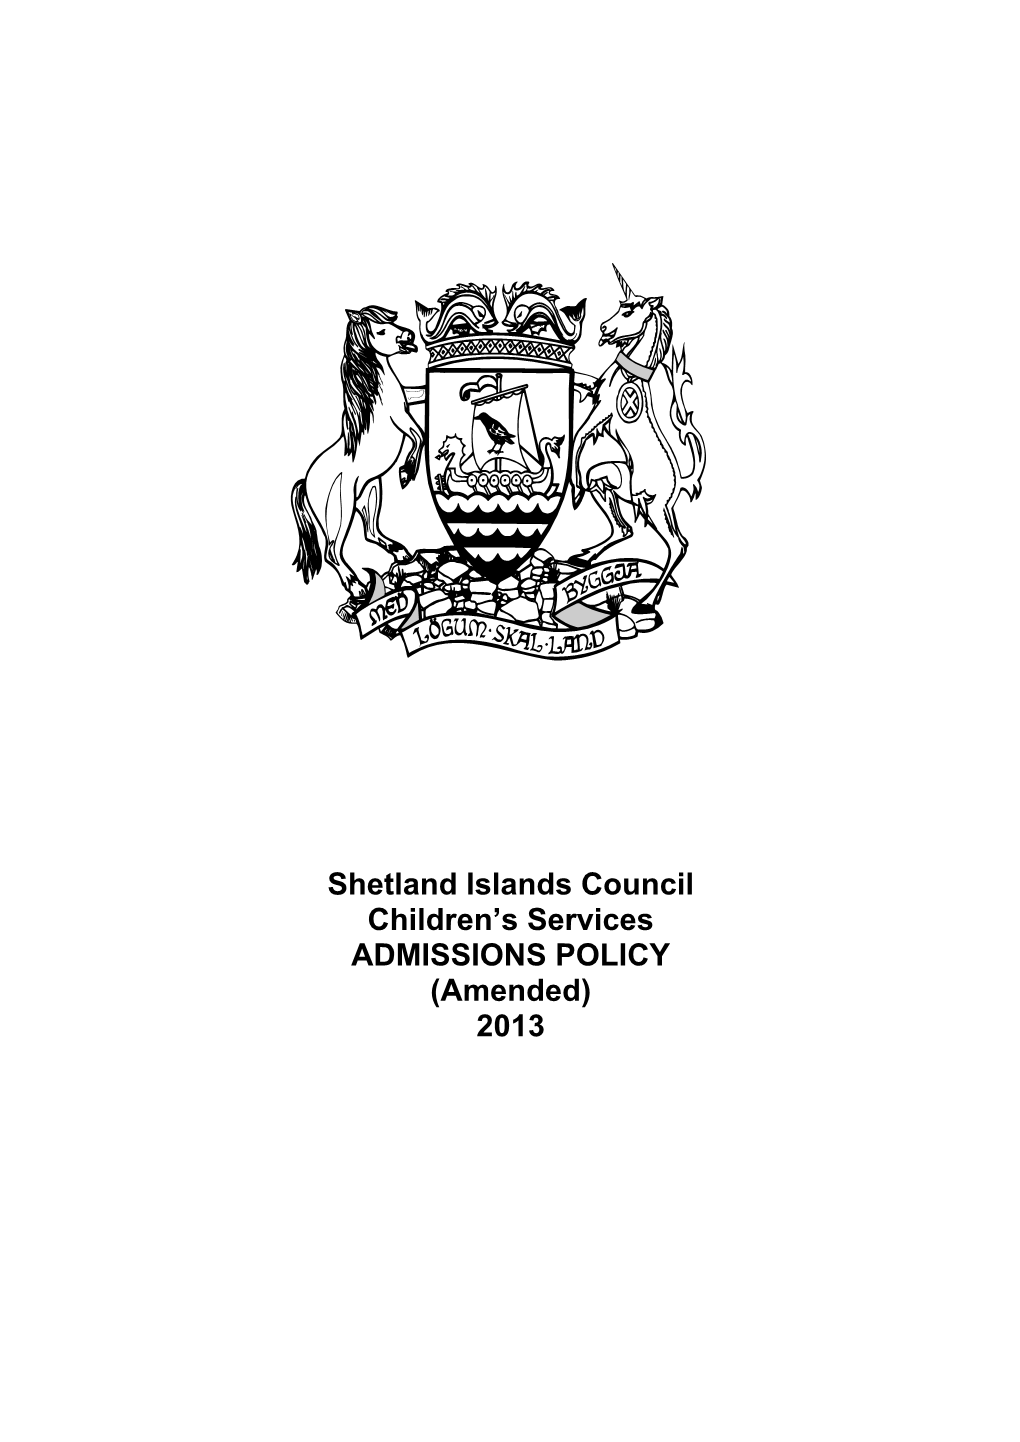 ADMISSIONS POLICY (Amended) 2013